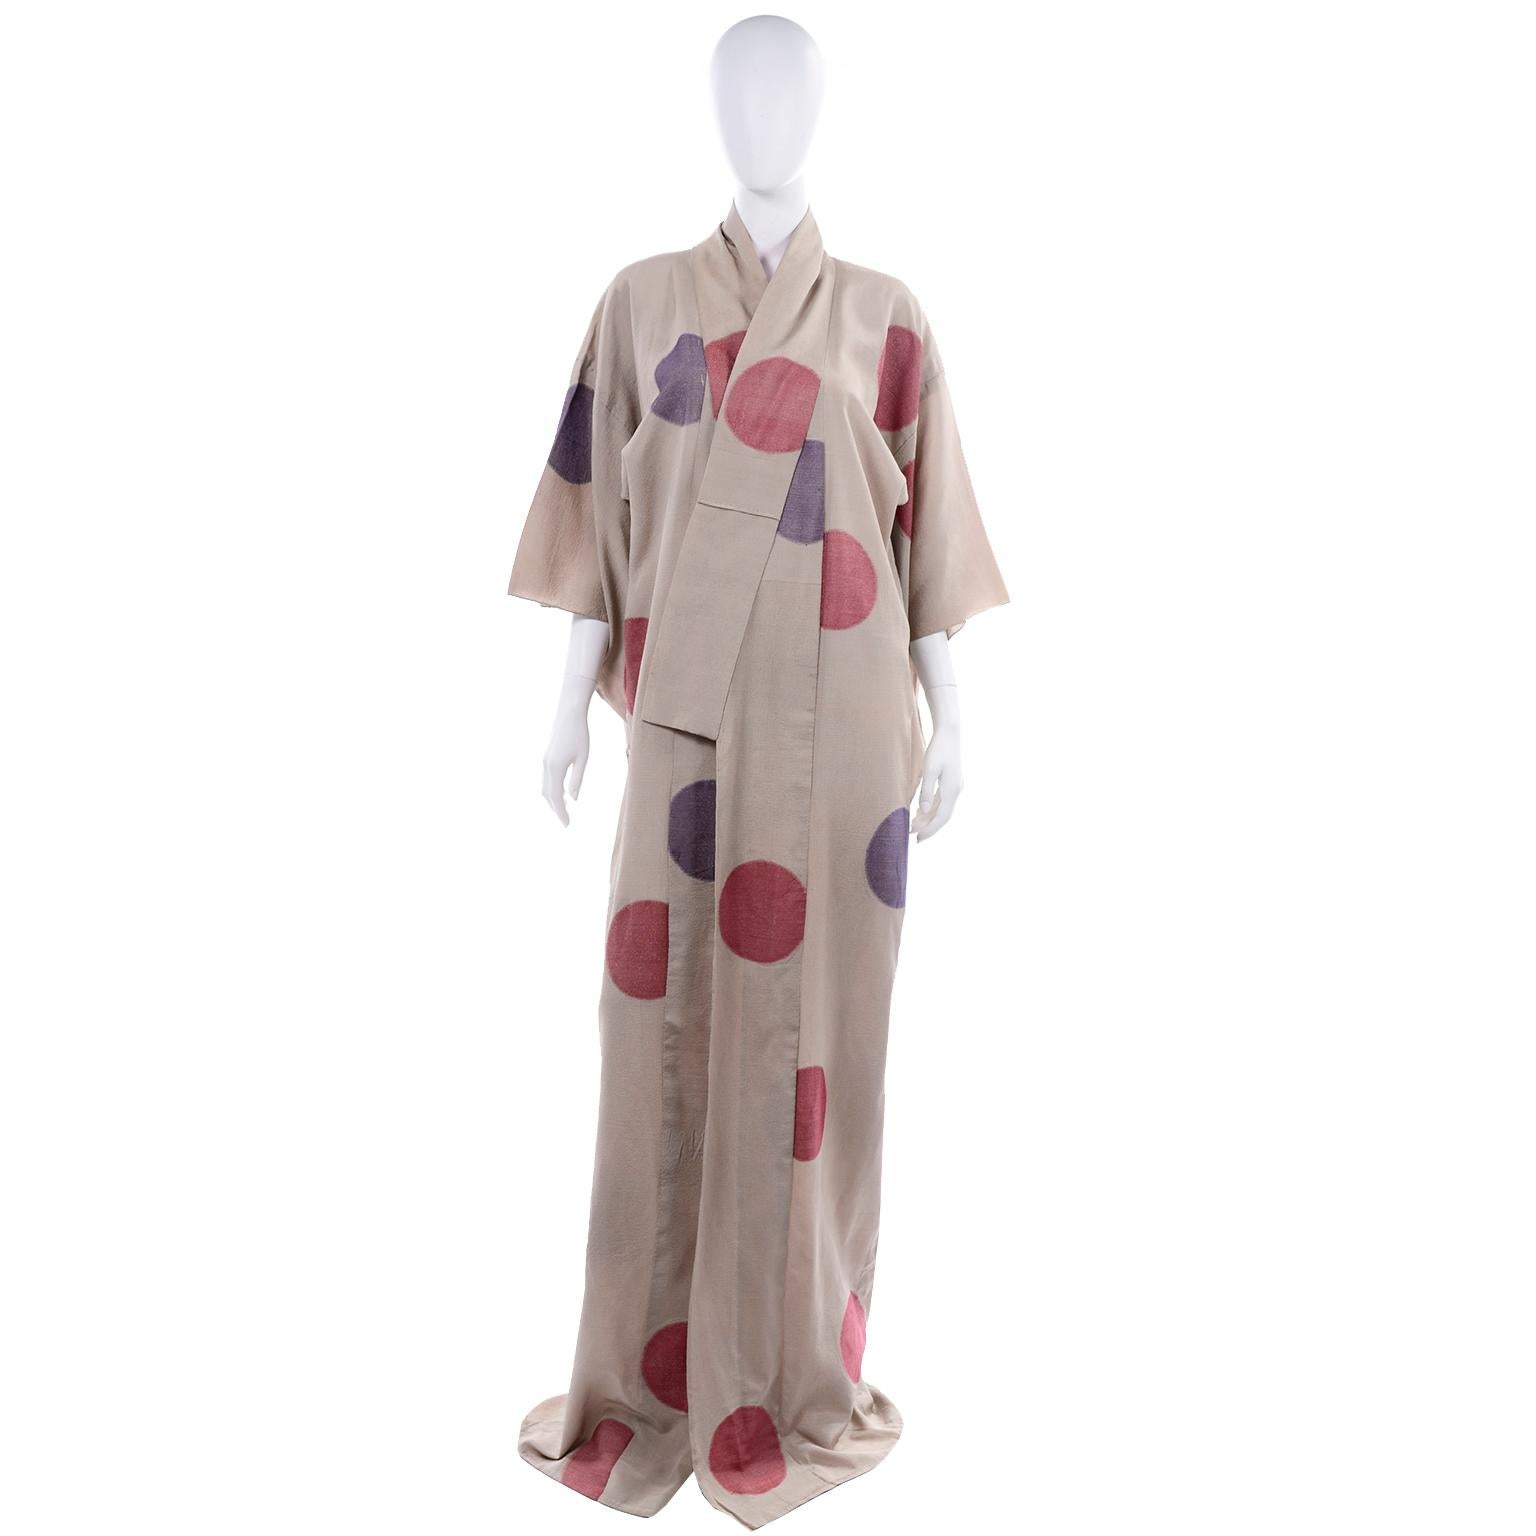 We love vintage kimonos and this is a really wonderful one! This  tan kimono has red and purple lamé circles or dots throughout. This raw silk kimono has pink silk lining at the top of the collar and on the lapels. There is an orange stitch in the